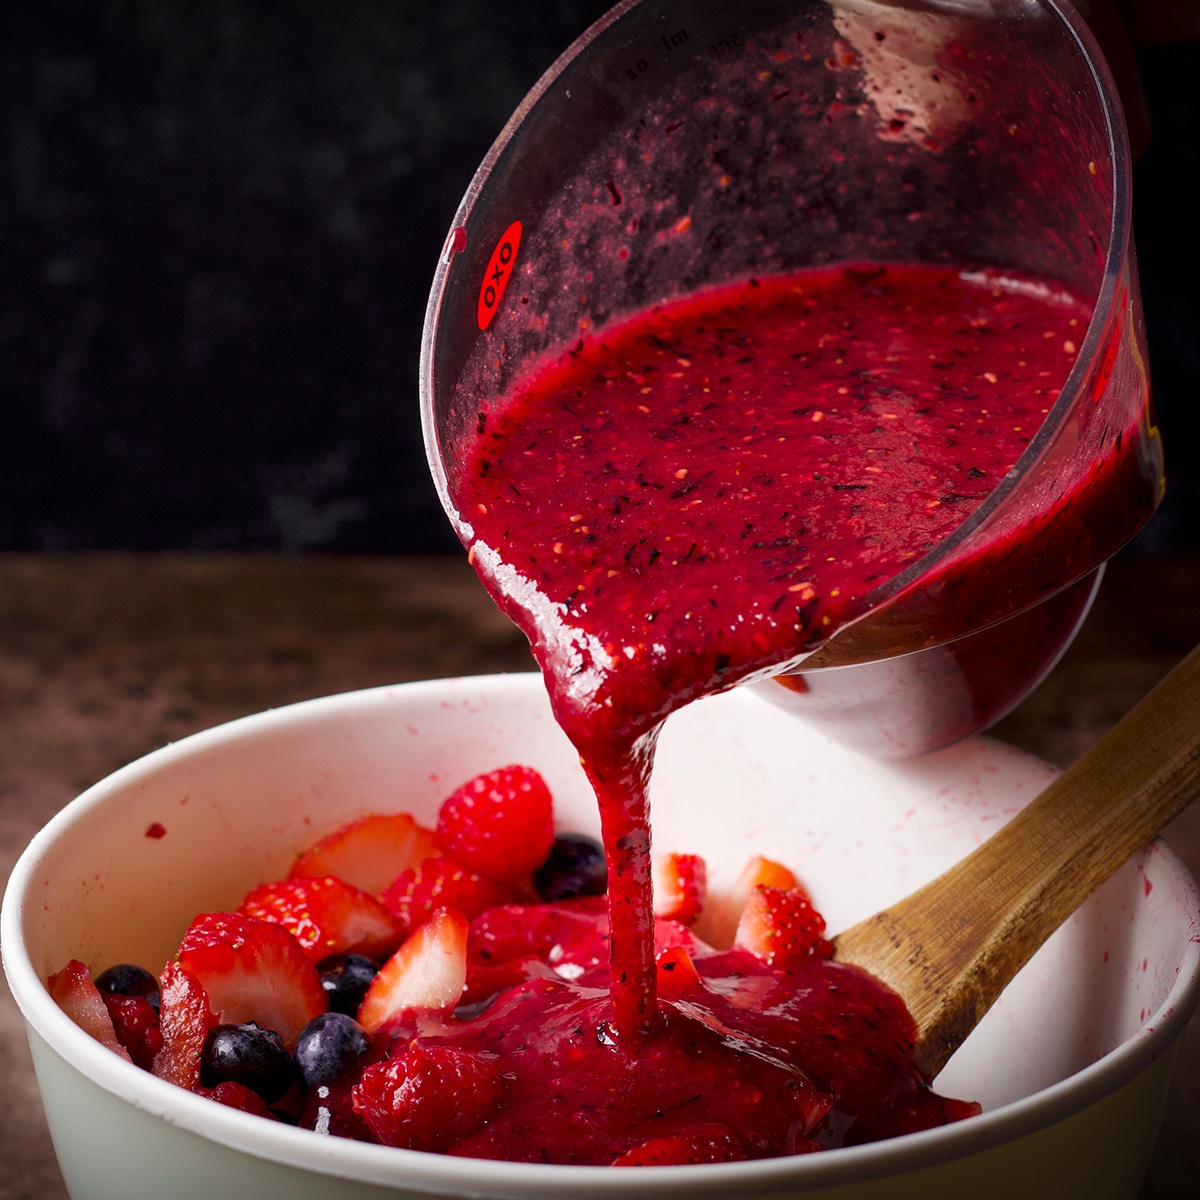 Pouring berry coulis over fresh berries to make a quick berry sauce.